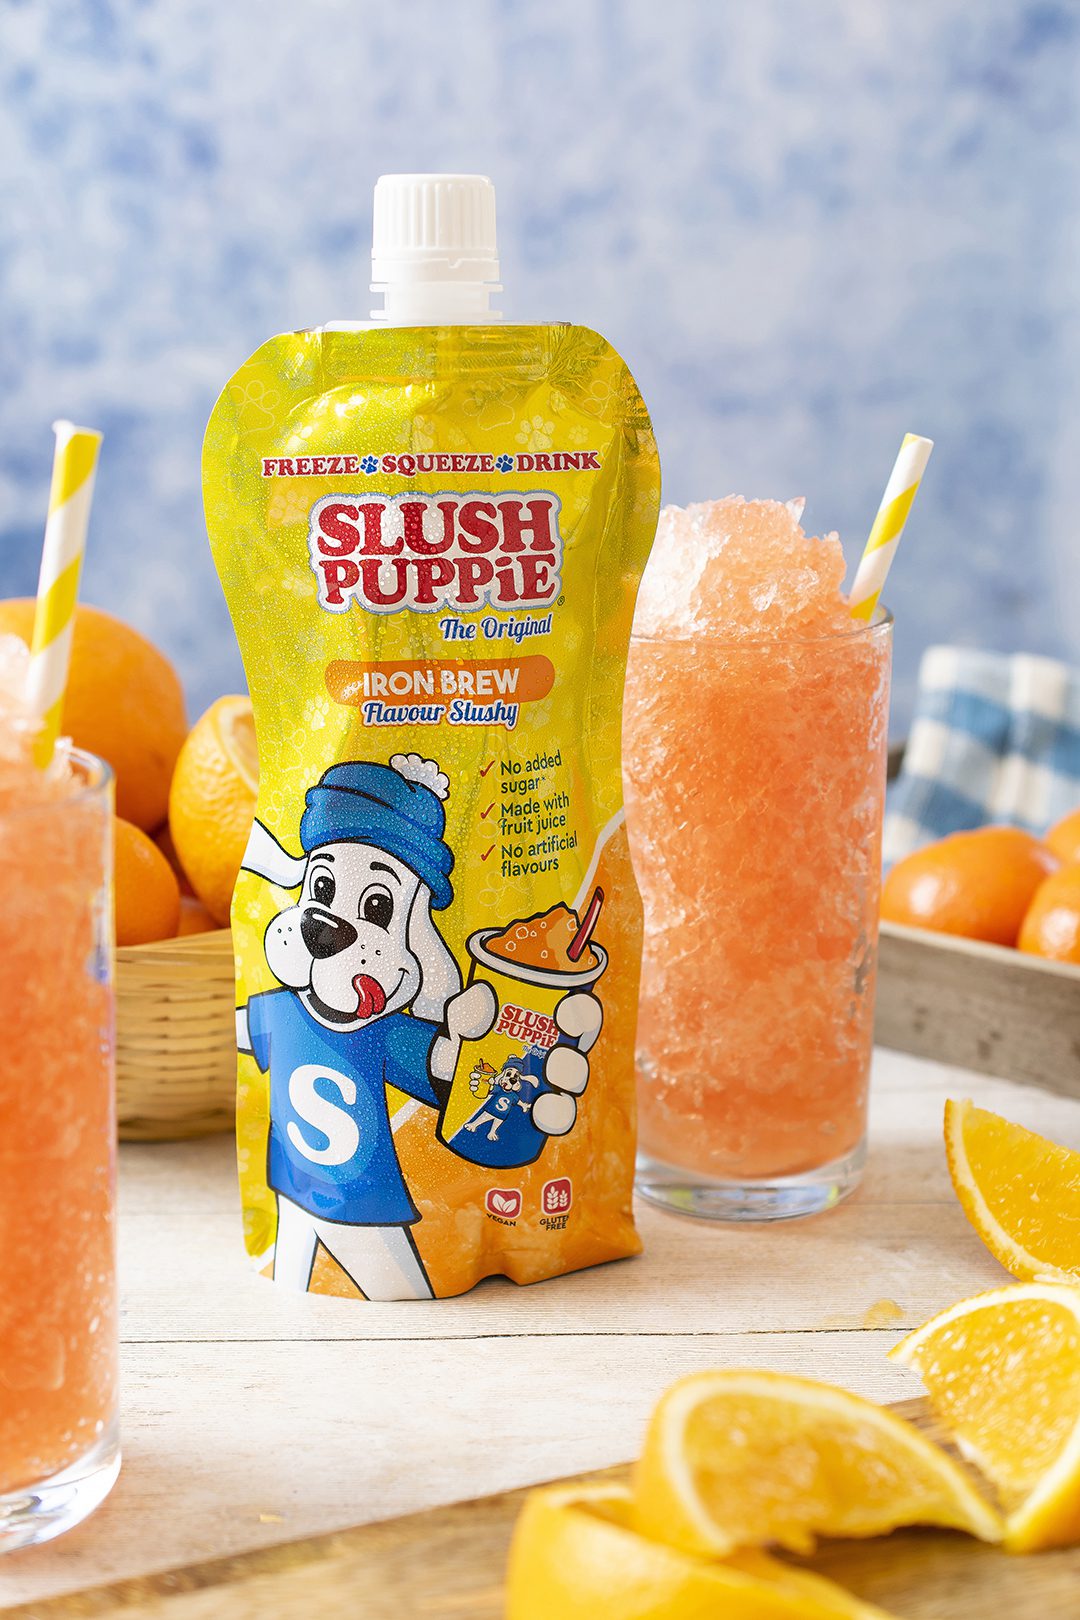 New Slush Puppie Iron Brew frozen drink pouch and served in a glass